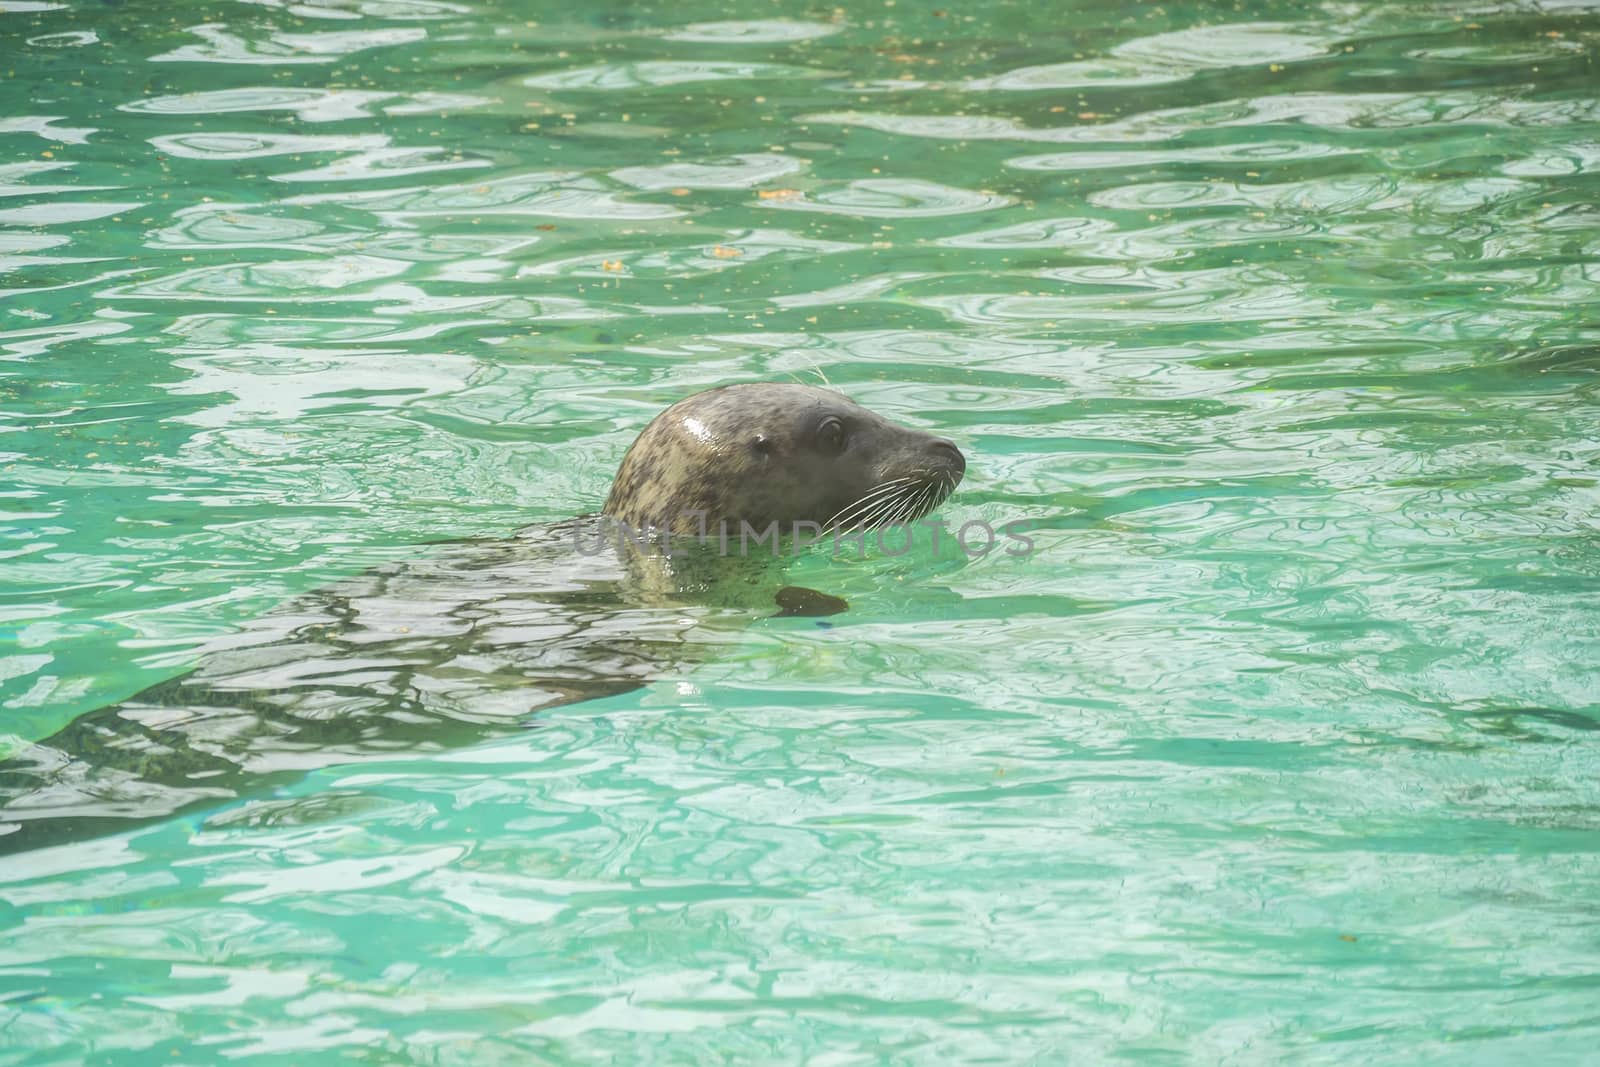 Seal in water with head protruding